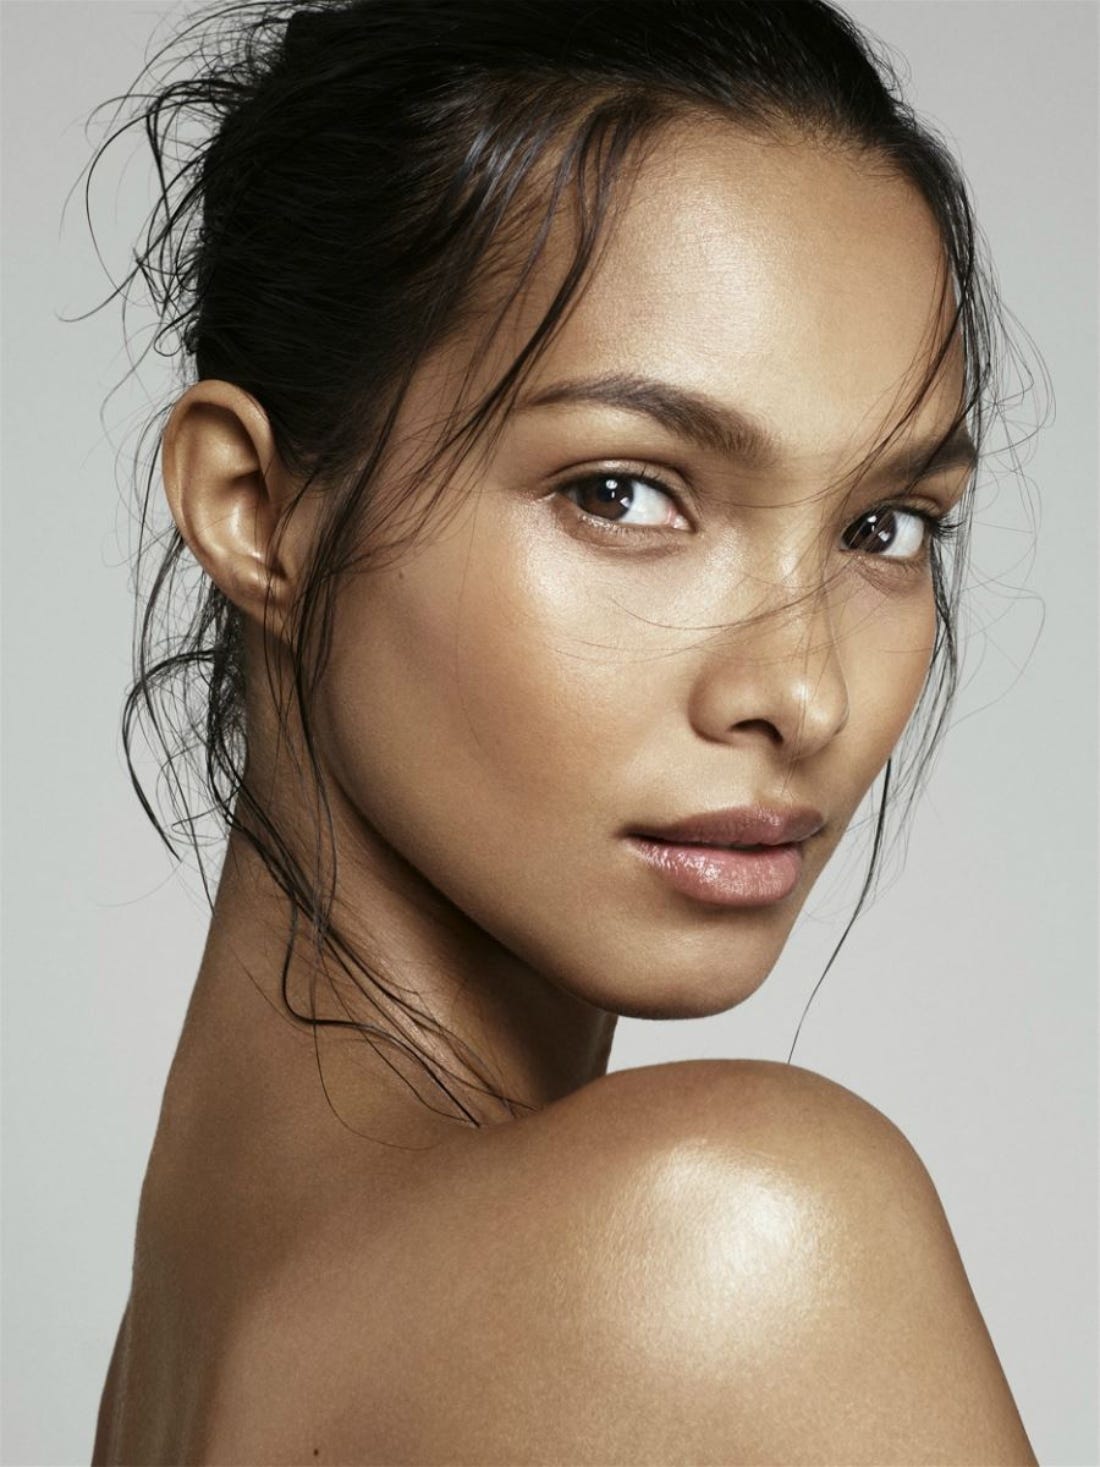 Brazilian Supermodel Lais Ribeiro Shares Her Top Self-care, Wellness, and  Beauty Tips, by Maria Angelova, CEO of Rebellious Intl., Authority  Magazine